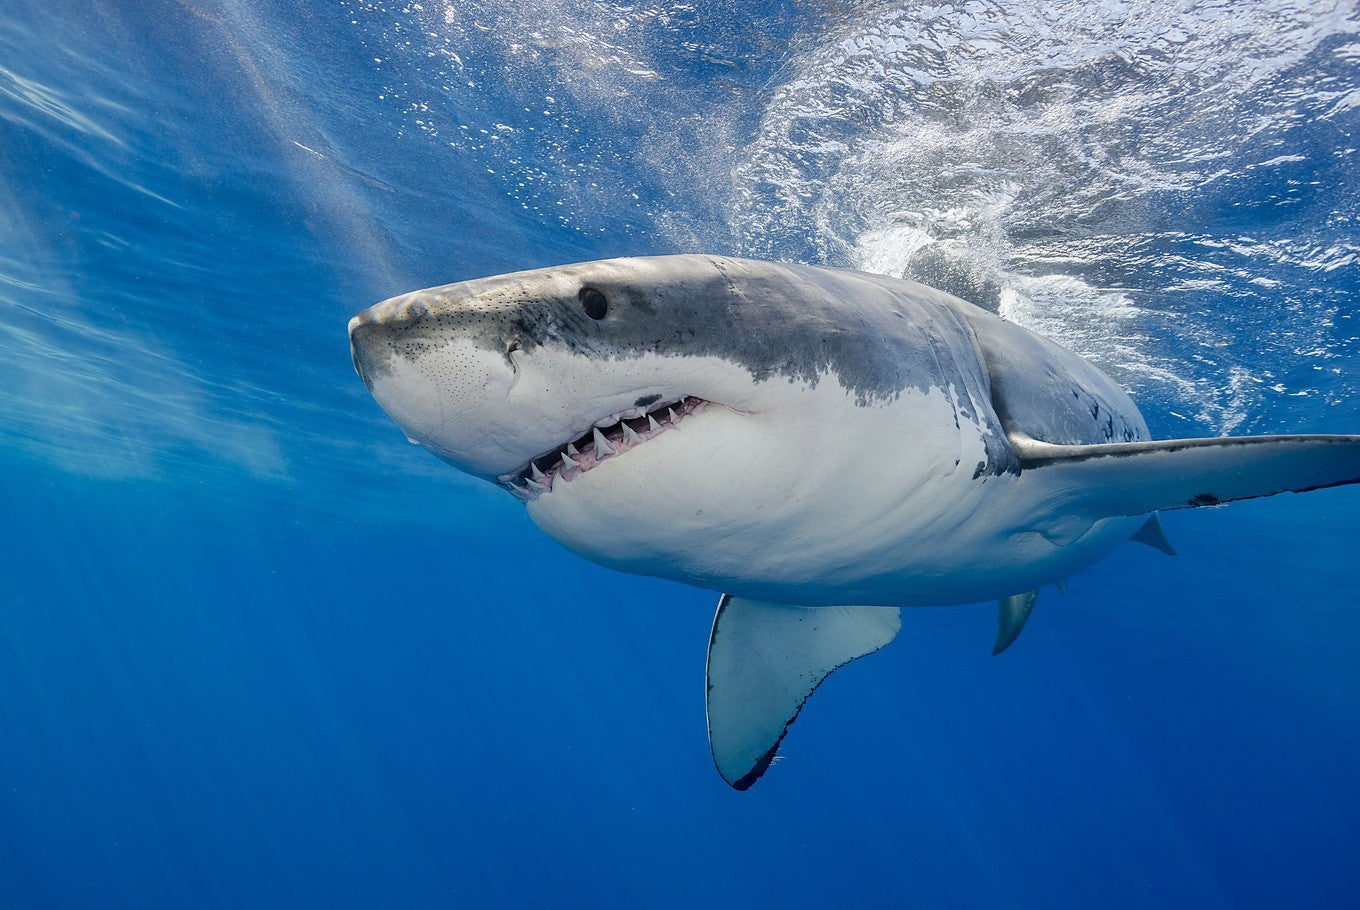 Facts about Great white sharks